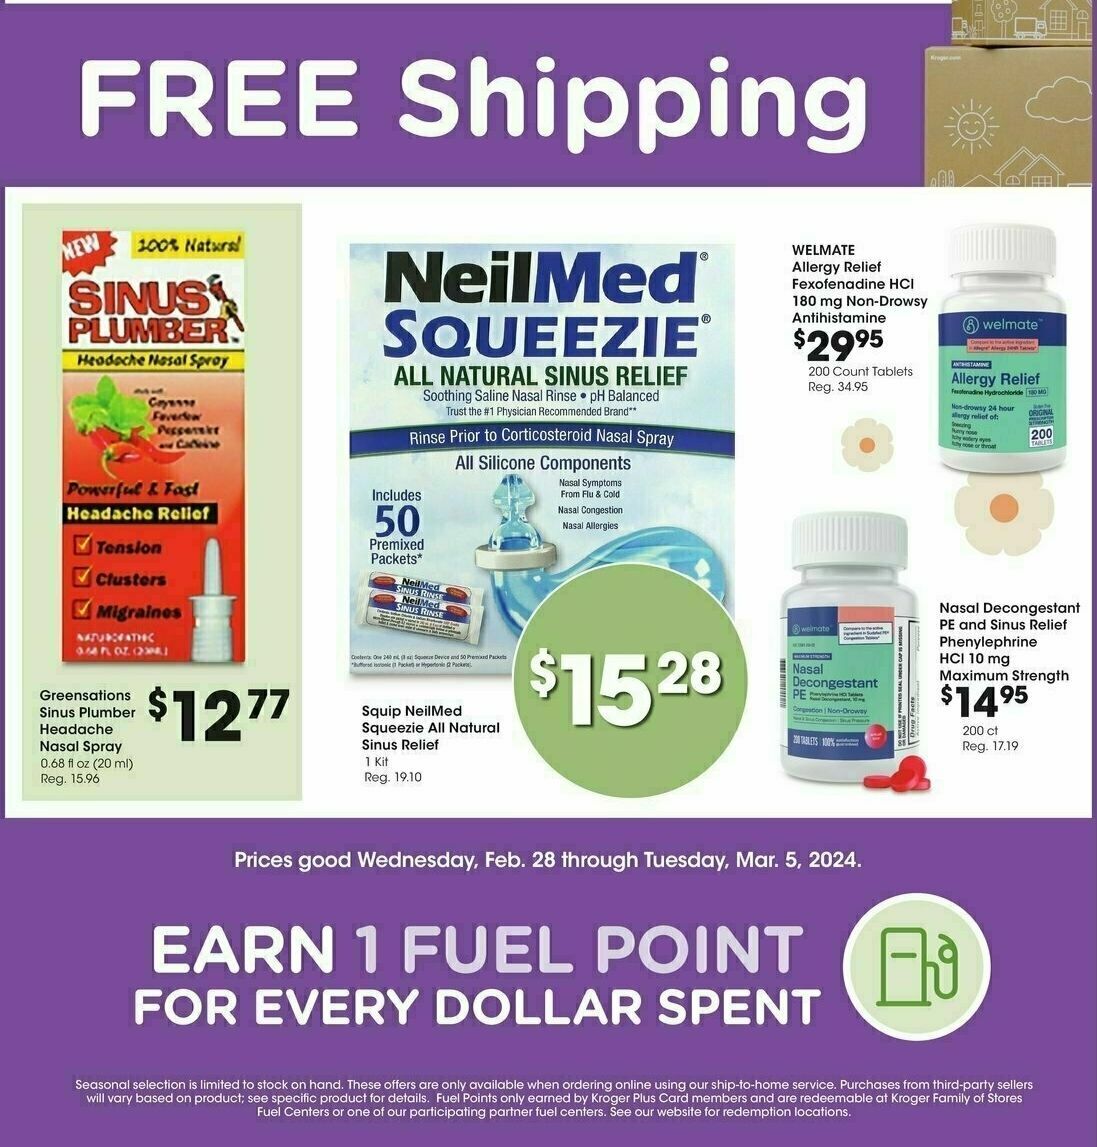 Food 4 Less Ship to Home Weekly Ad from February 28